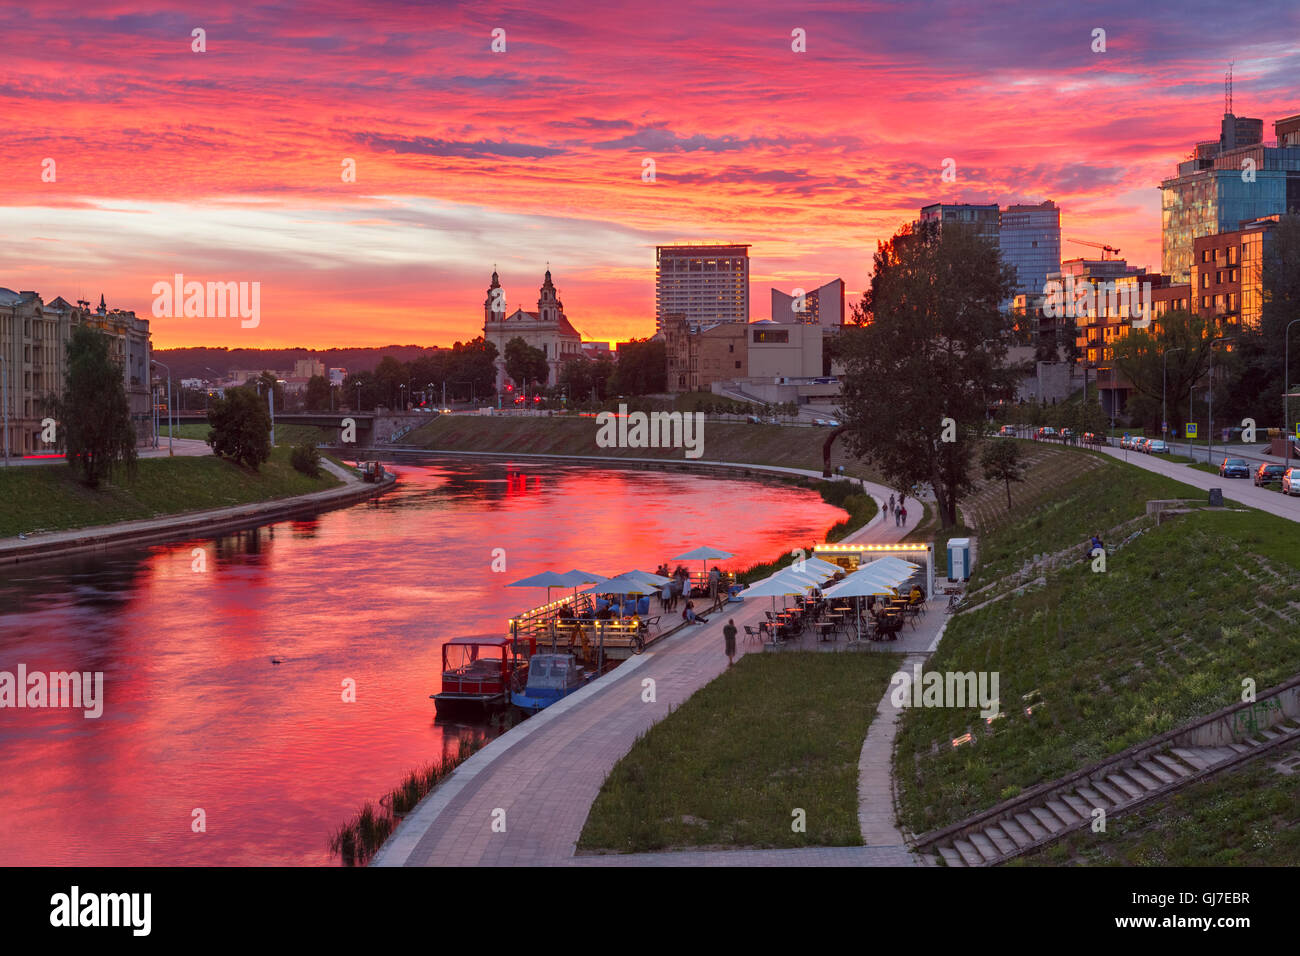 Vilnius at sunset, Lithuania, Baltic states. Stock Photo